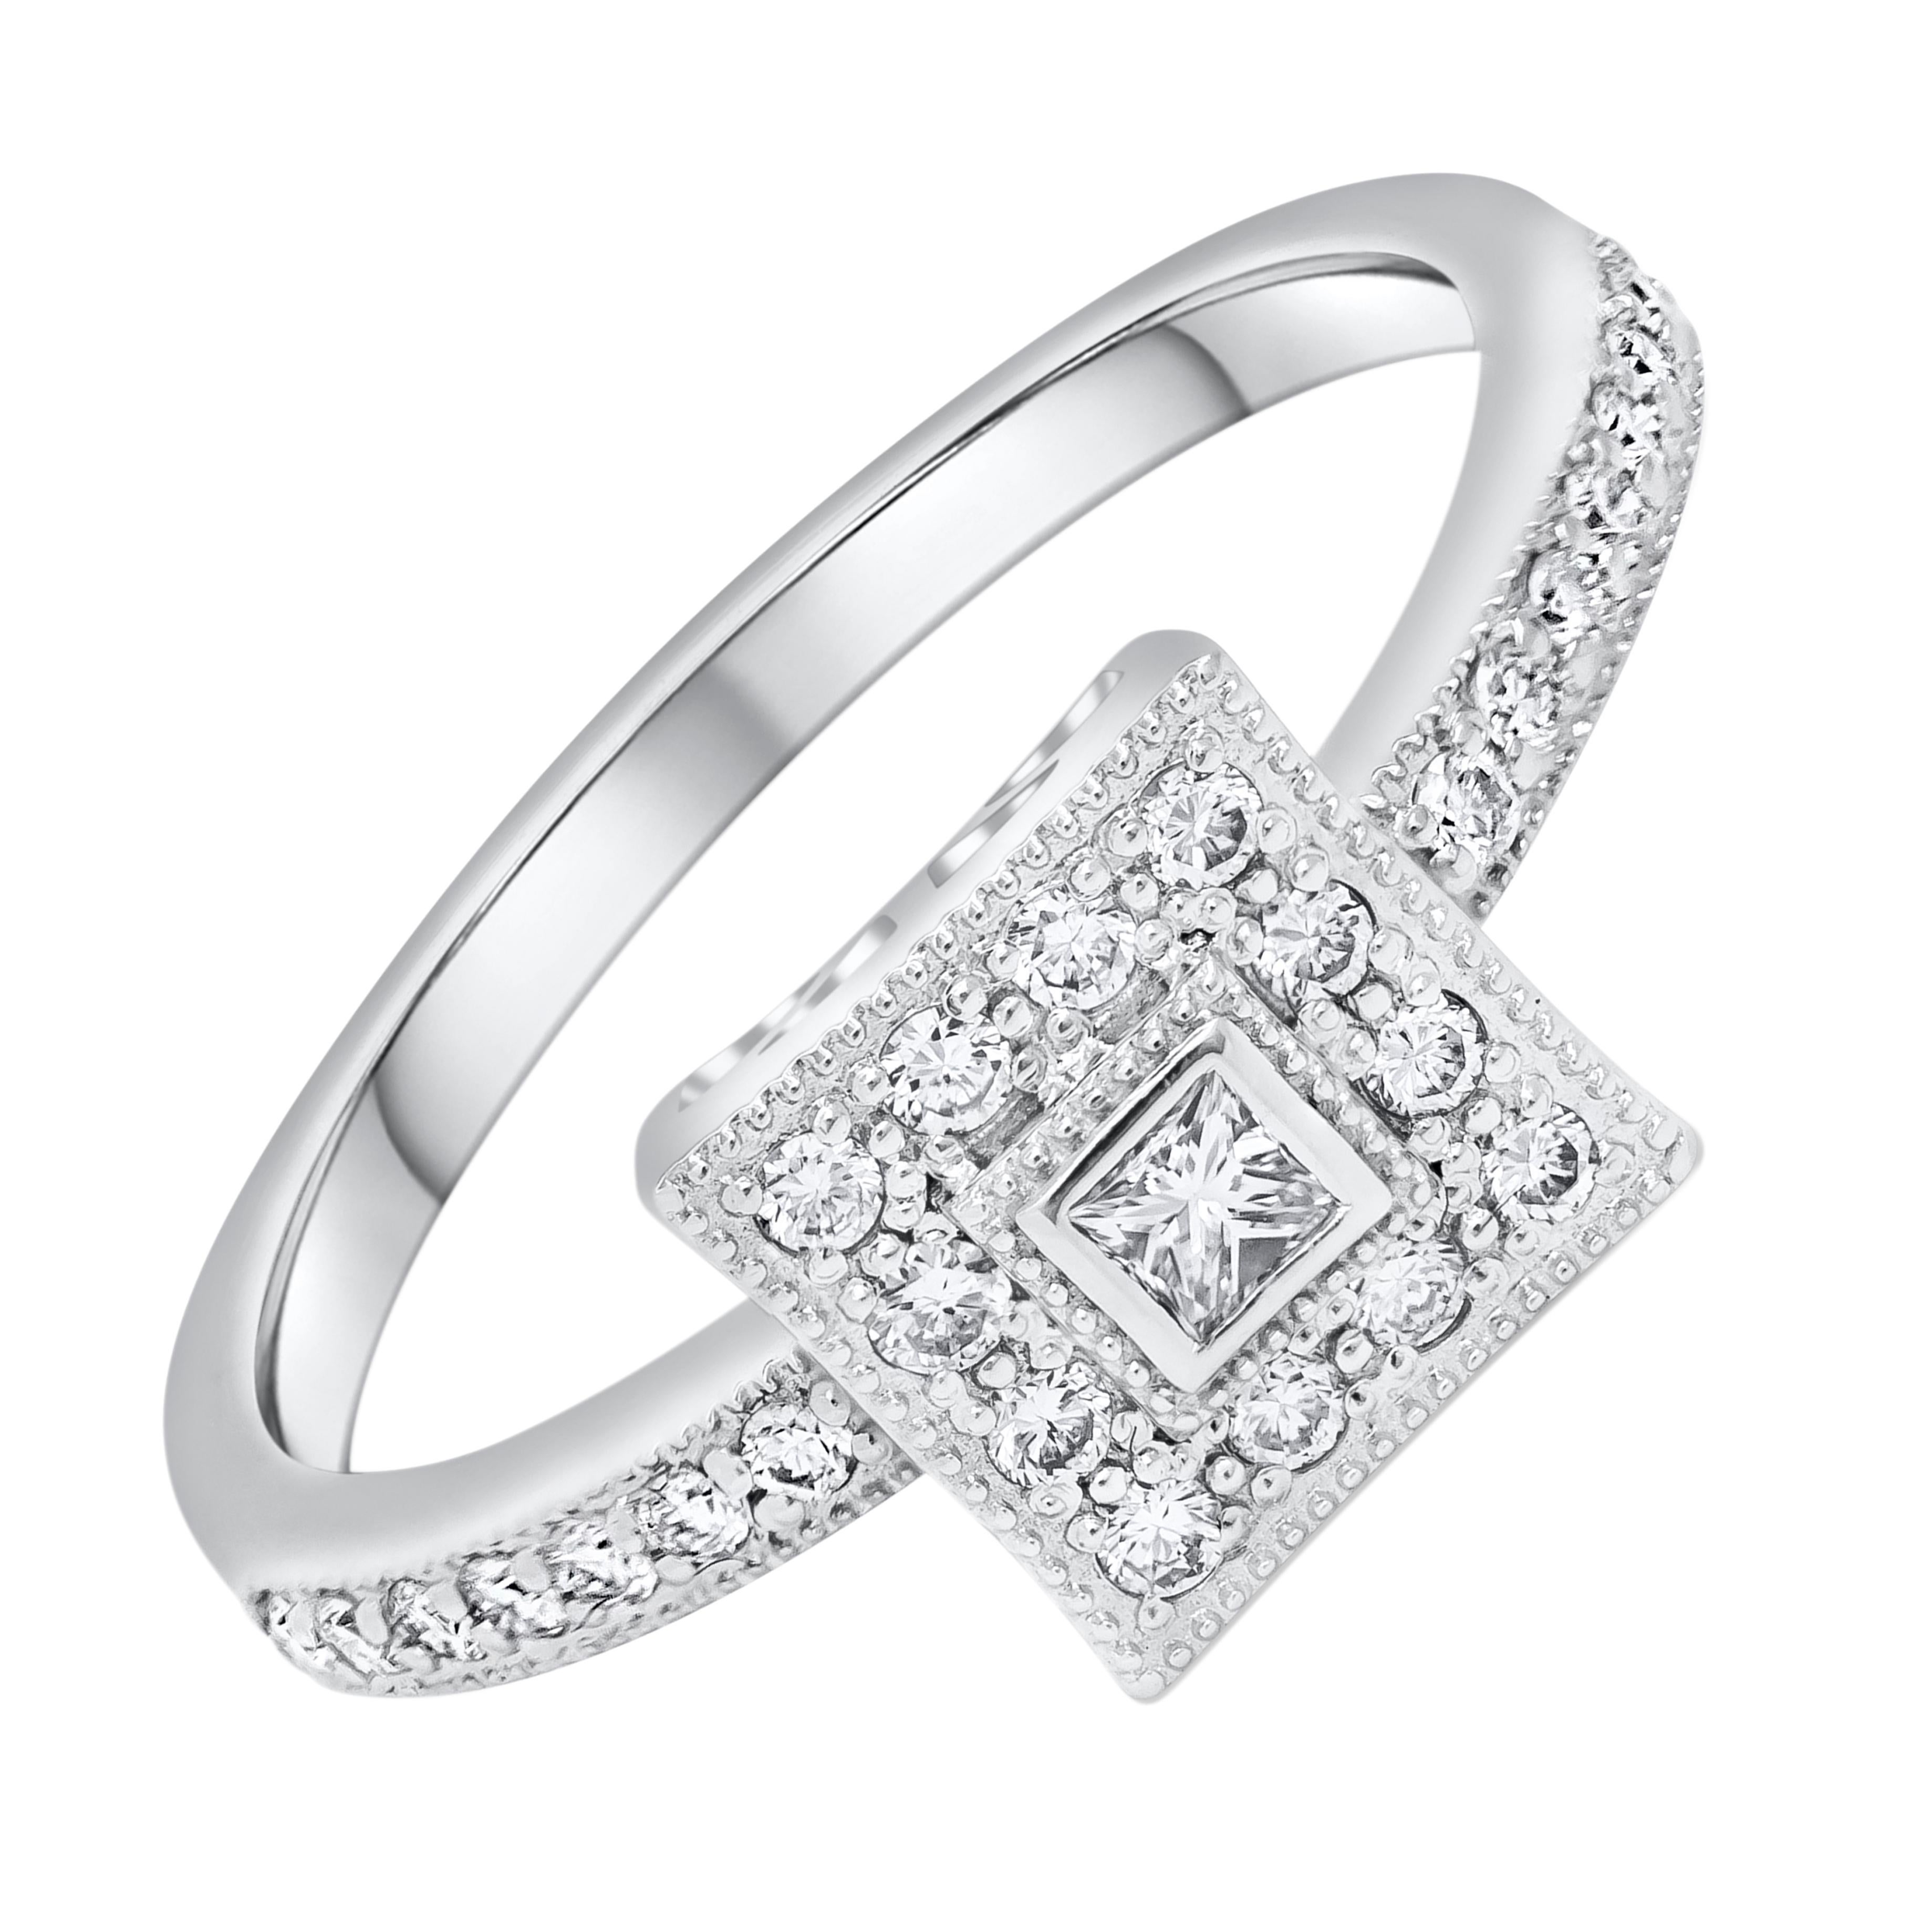 Features a 0.07 carats princess cut diamond bezel set in 18k white gold. Surrounding by single row of round brilliant diamonds, set in an accented 18k white gold shank. Accent diamonds weigh 0.30 carats total. Finished with milgrain edges for an